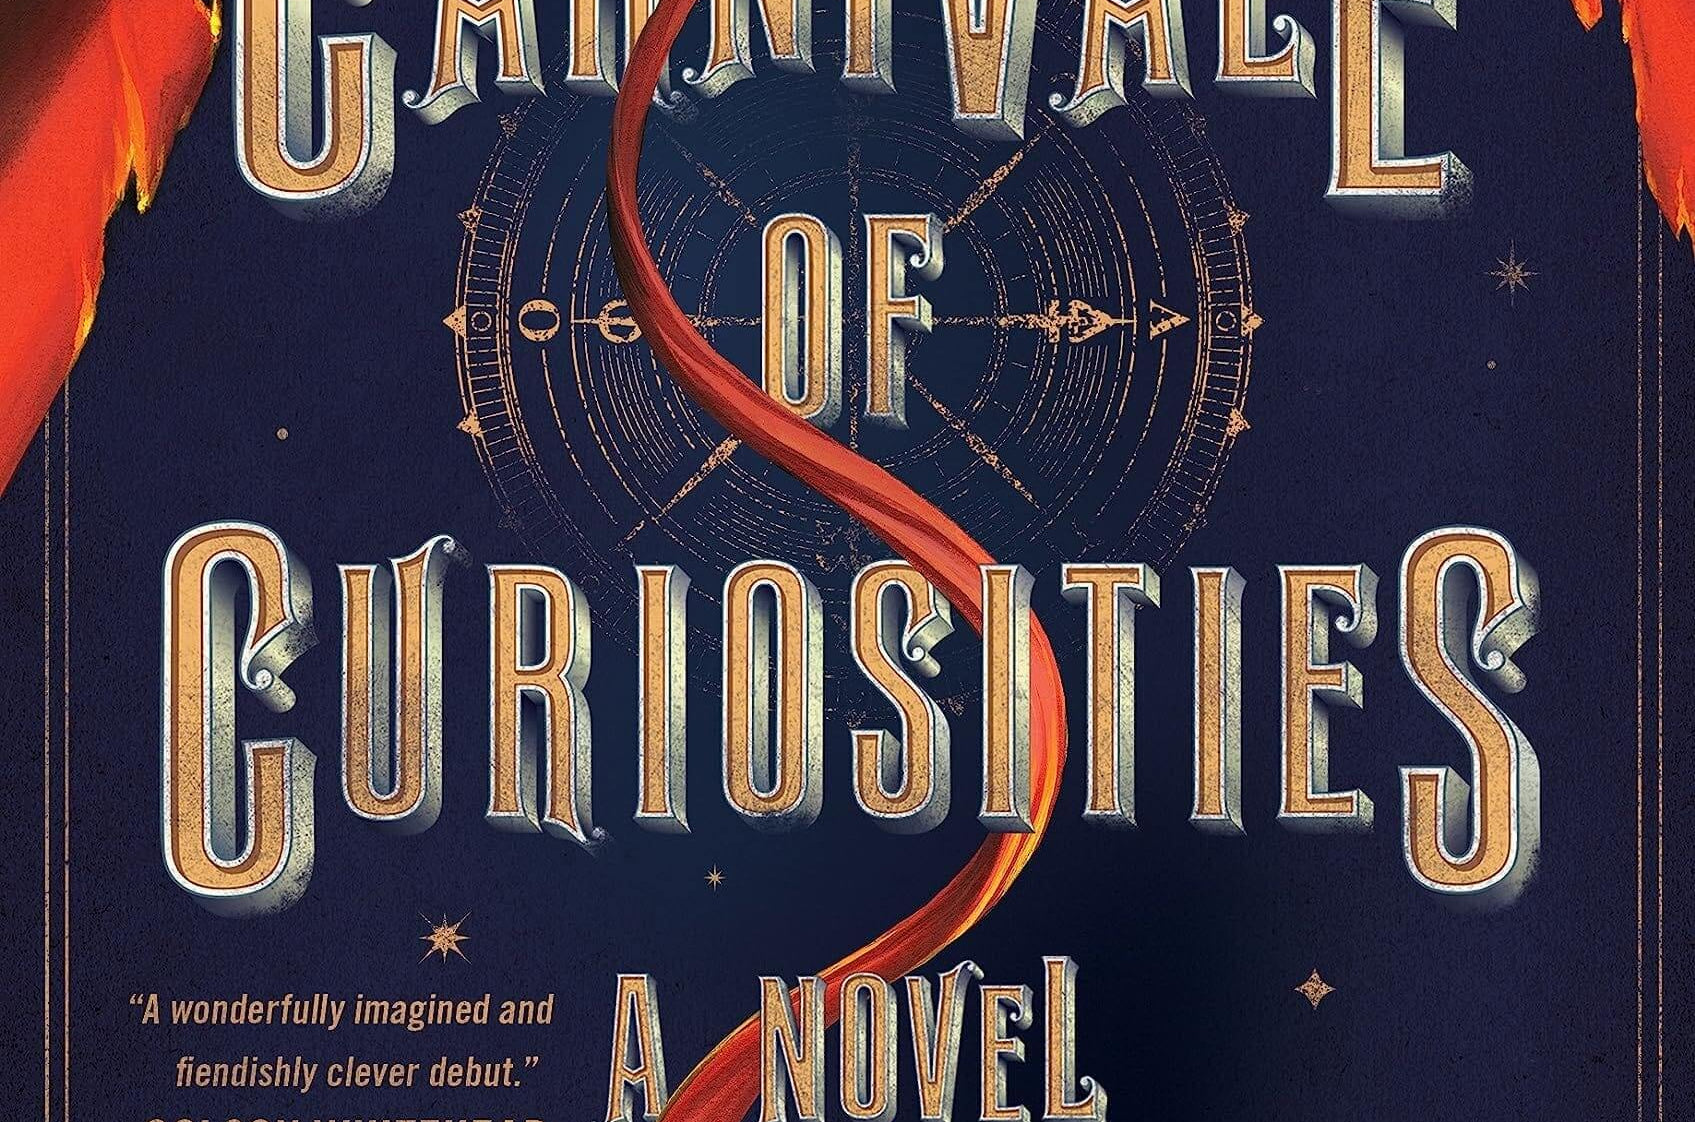 Hachette Books The Carnivale of Curiosities, Hardcover by Amiee Gibbs